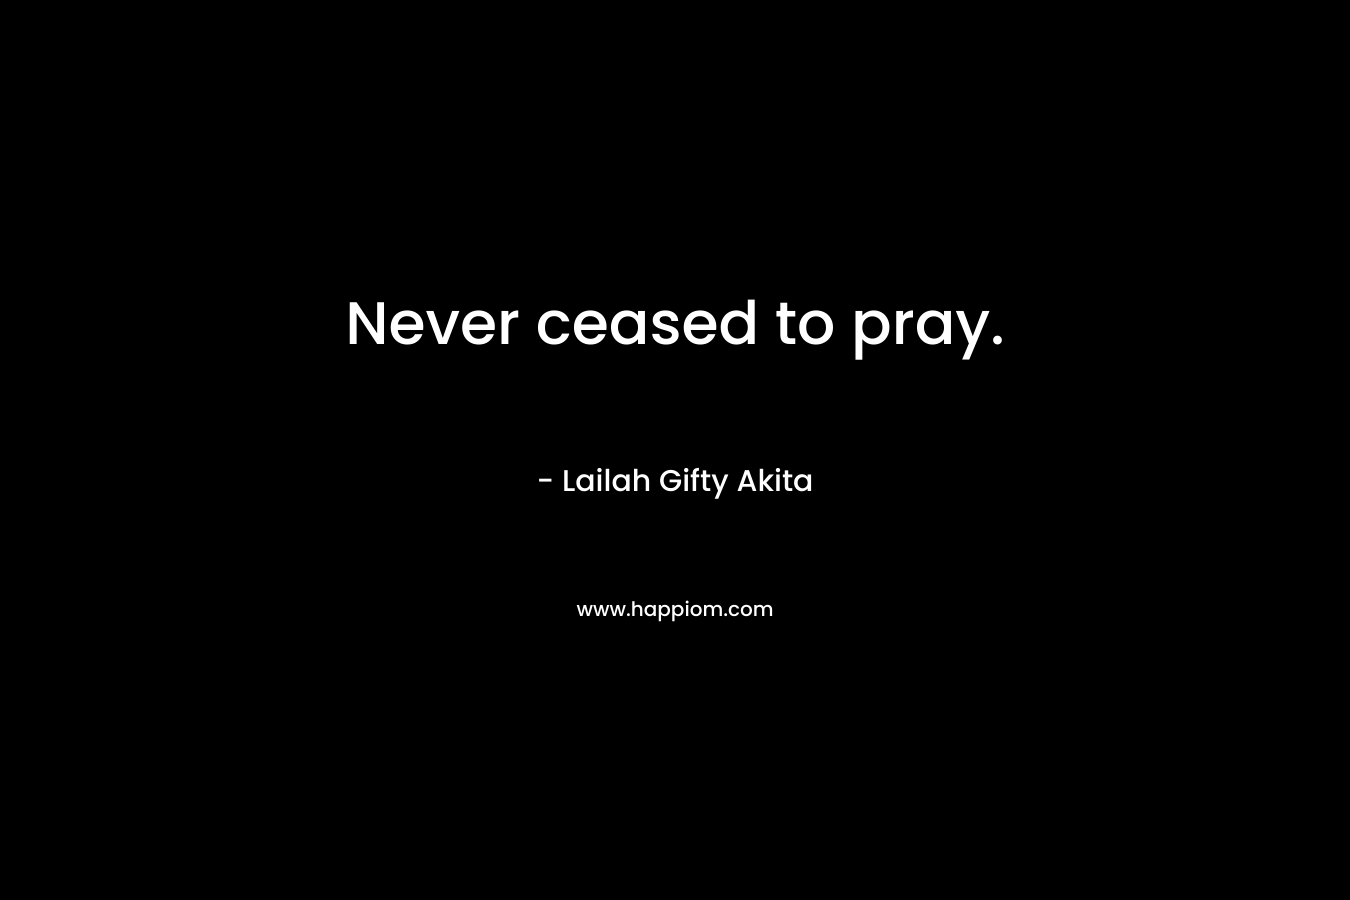 Never ceased to pray.